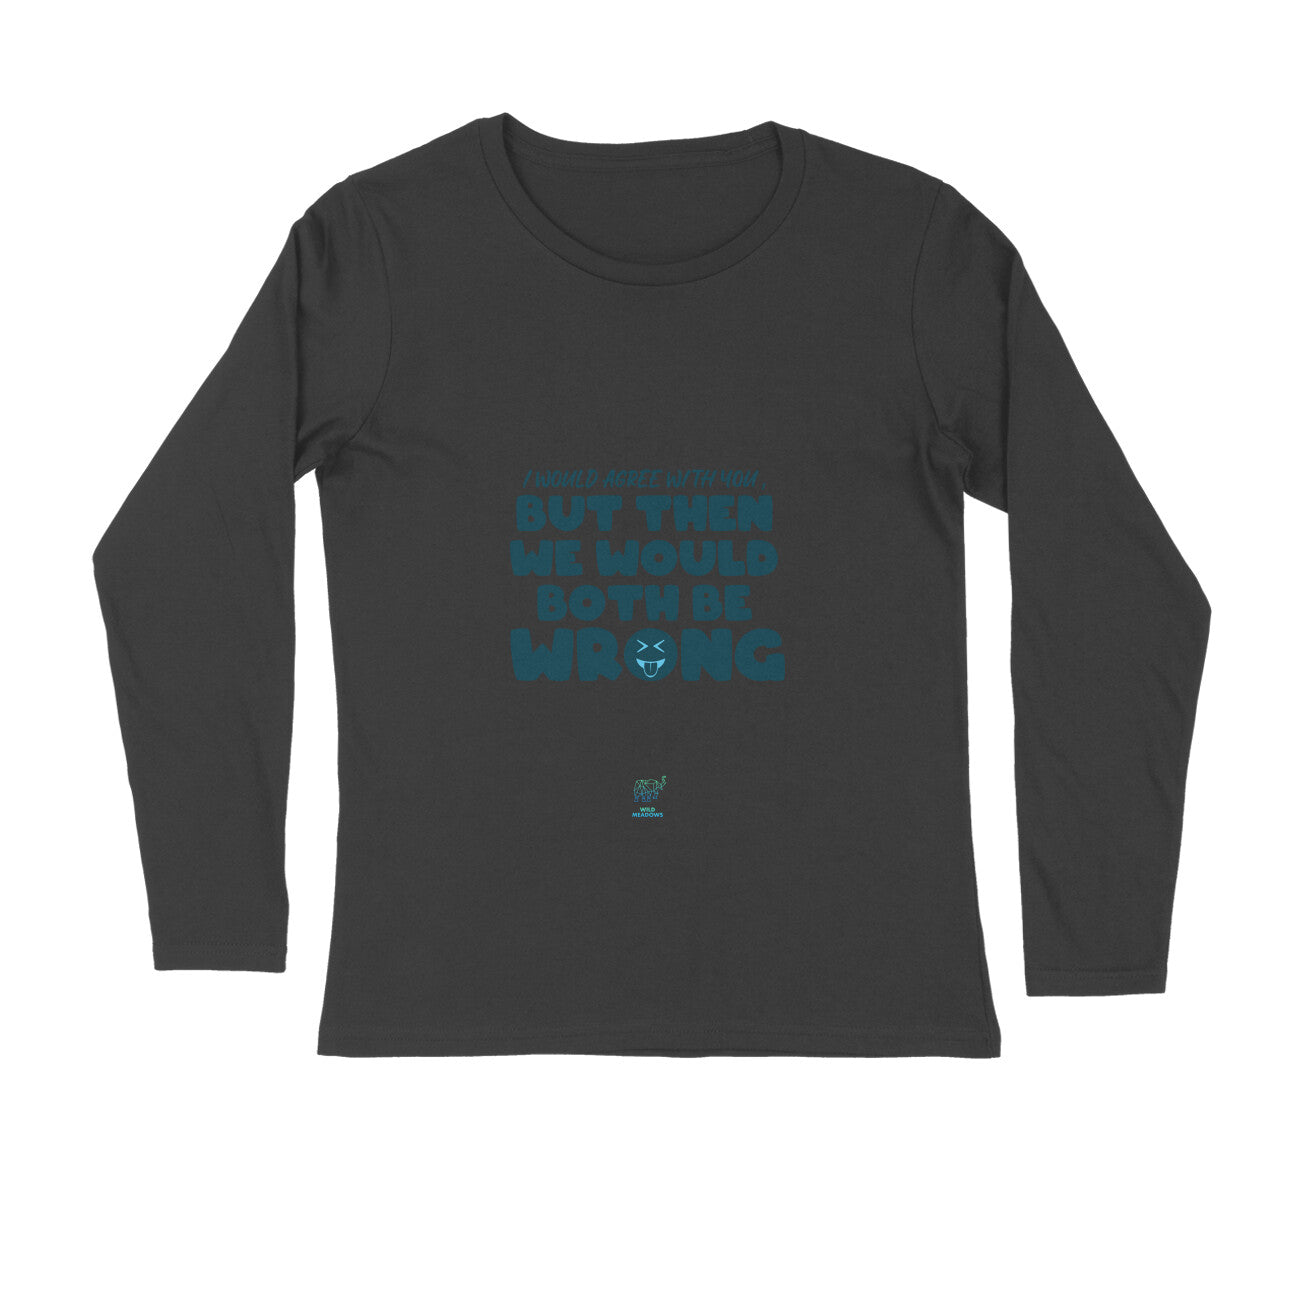 We Both will be wrong - Long Sleeve Unisex Round neck Tee